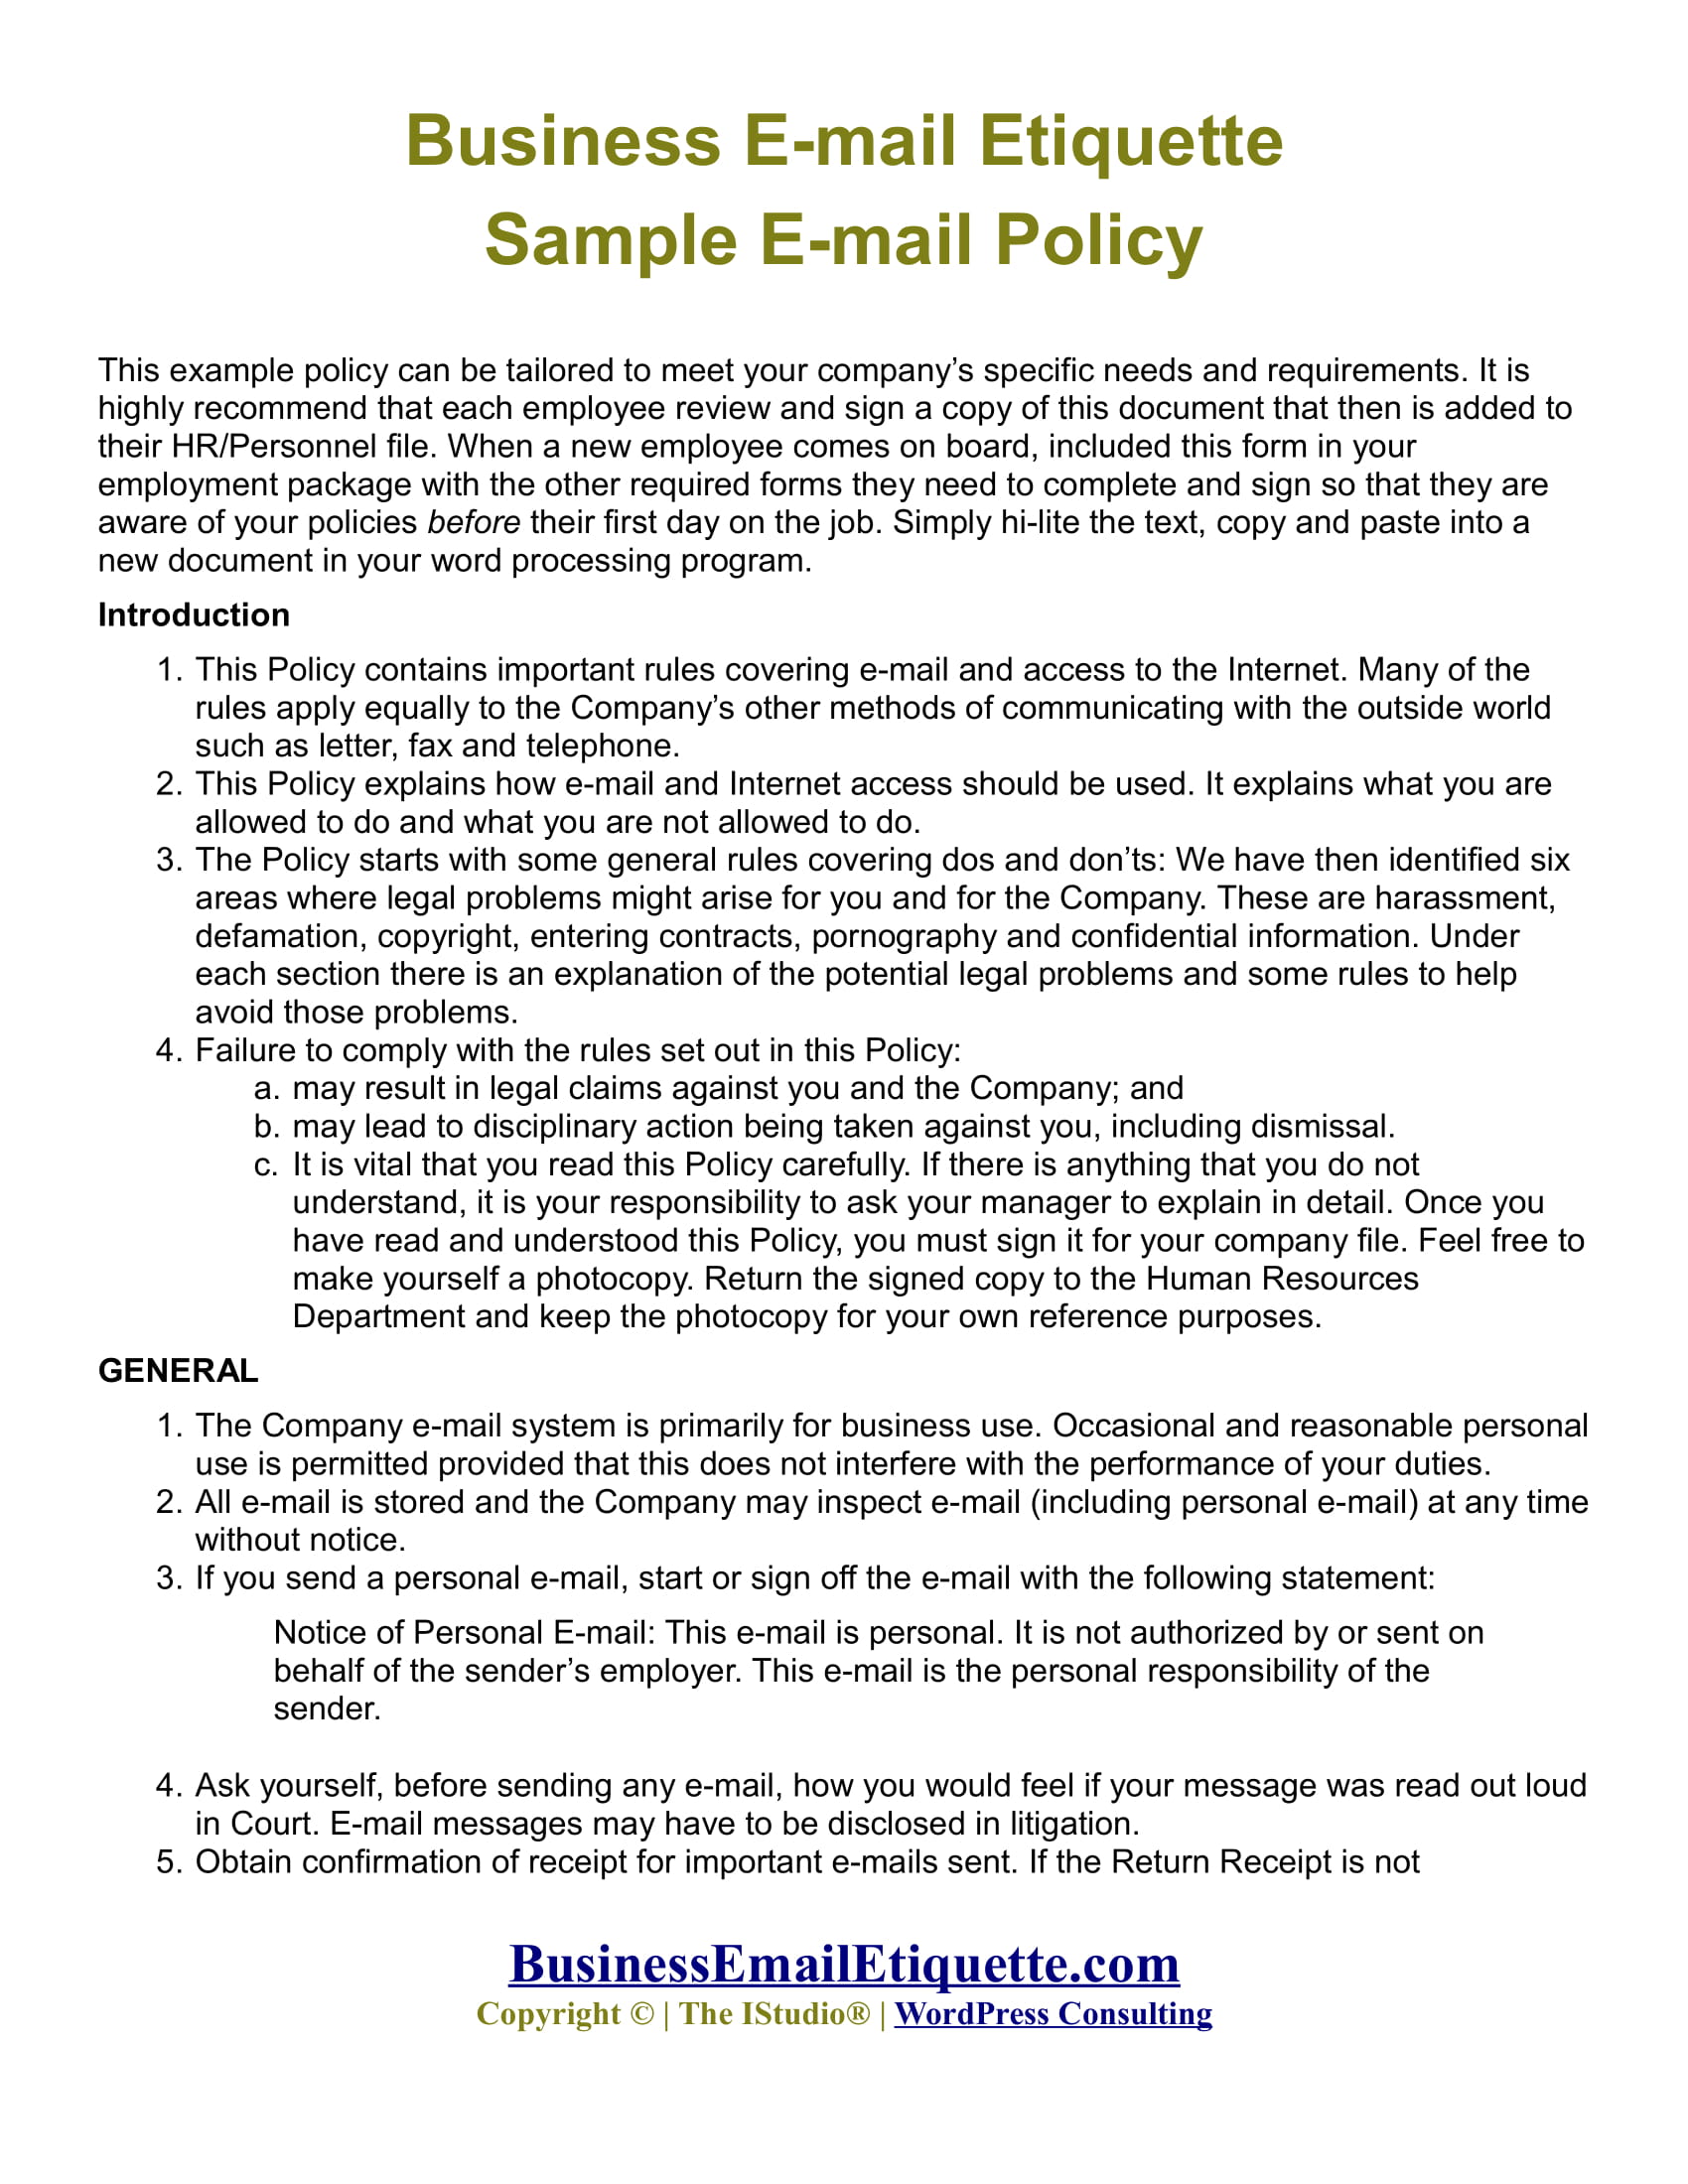 business email etiquette and employee email policy example